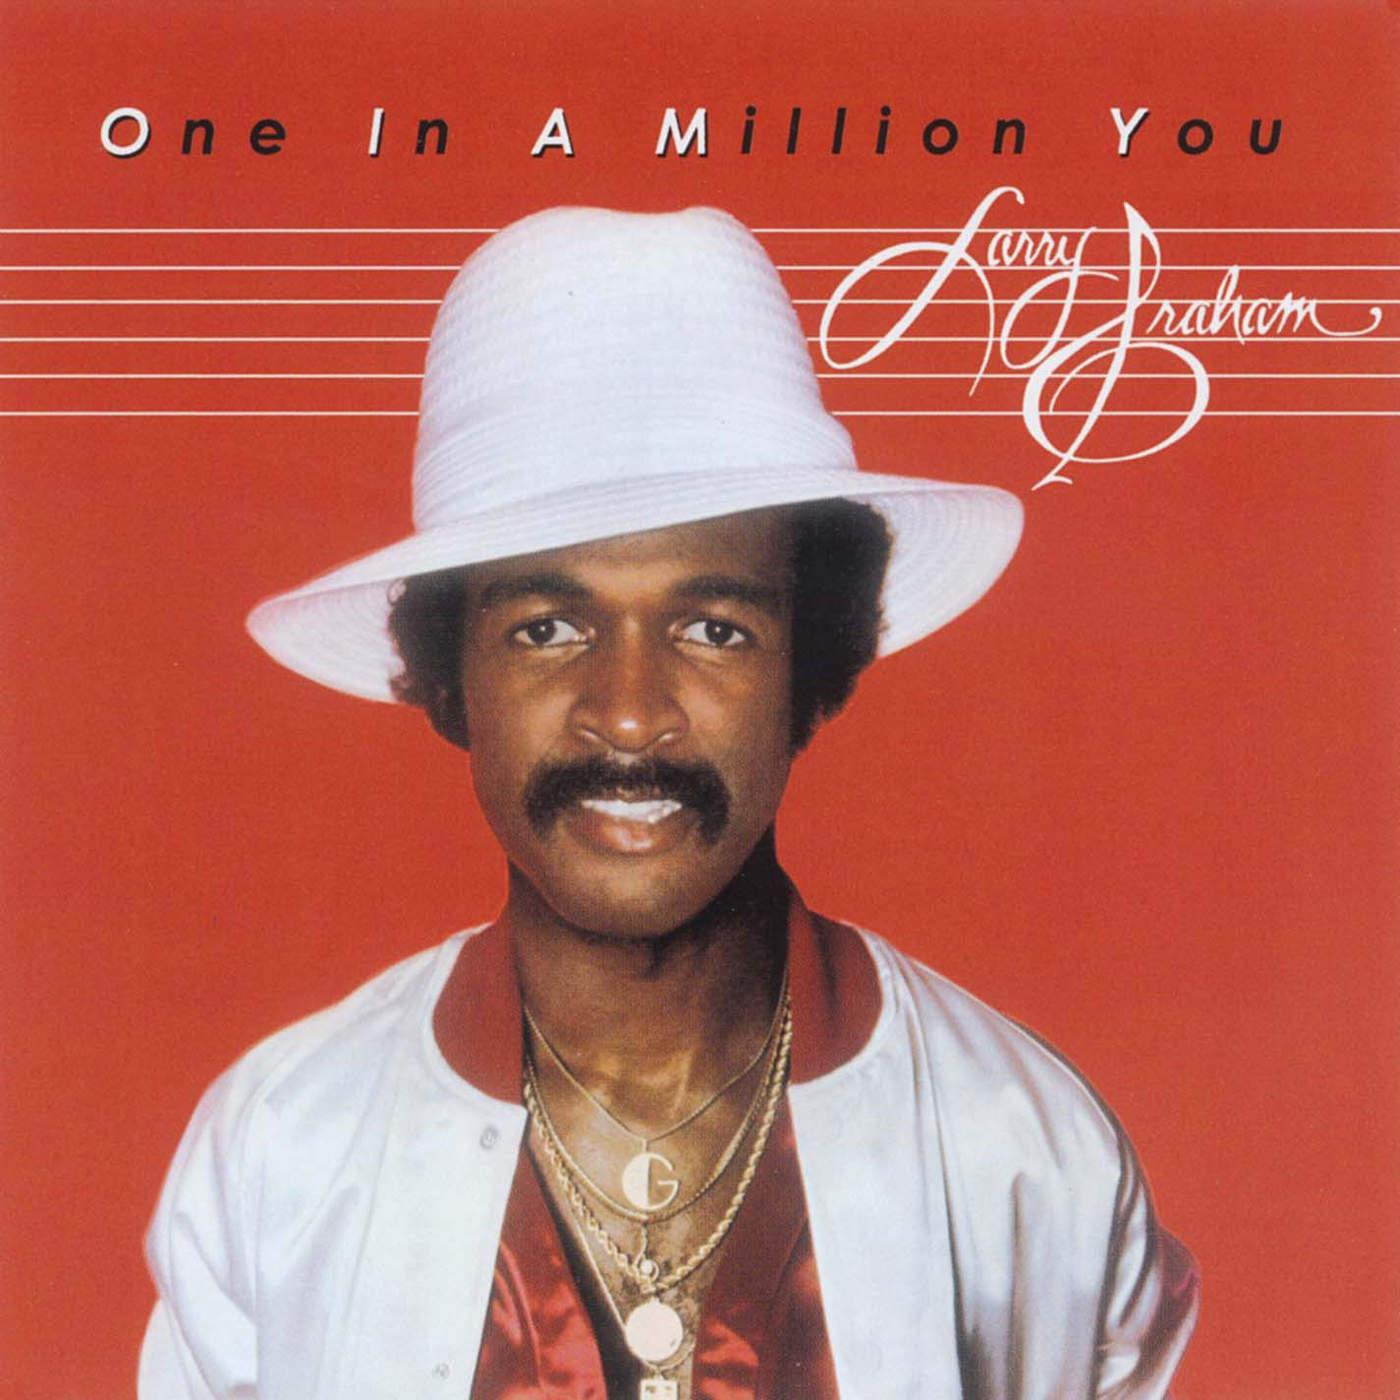 Art for One In a Million You by Larry Graham